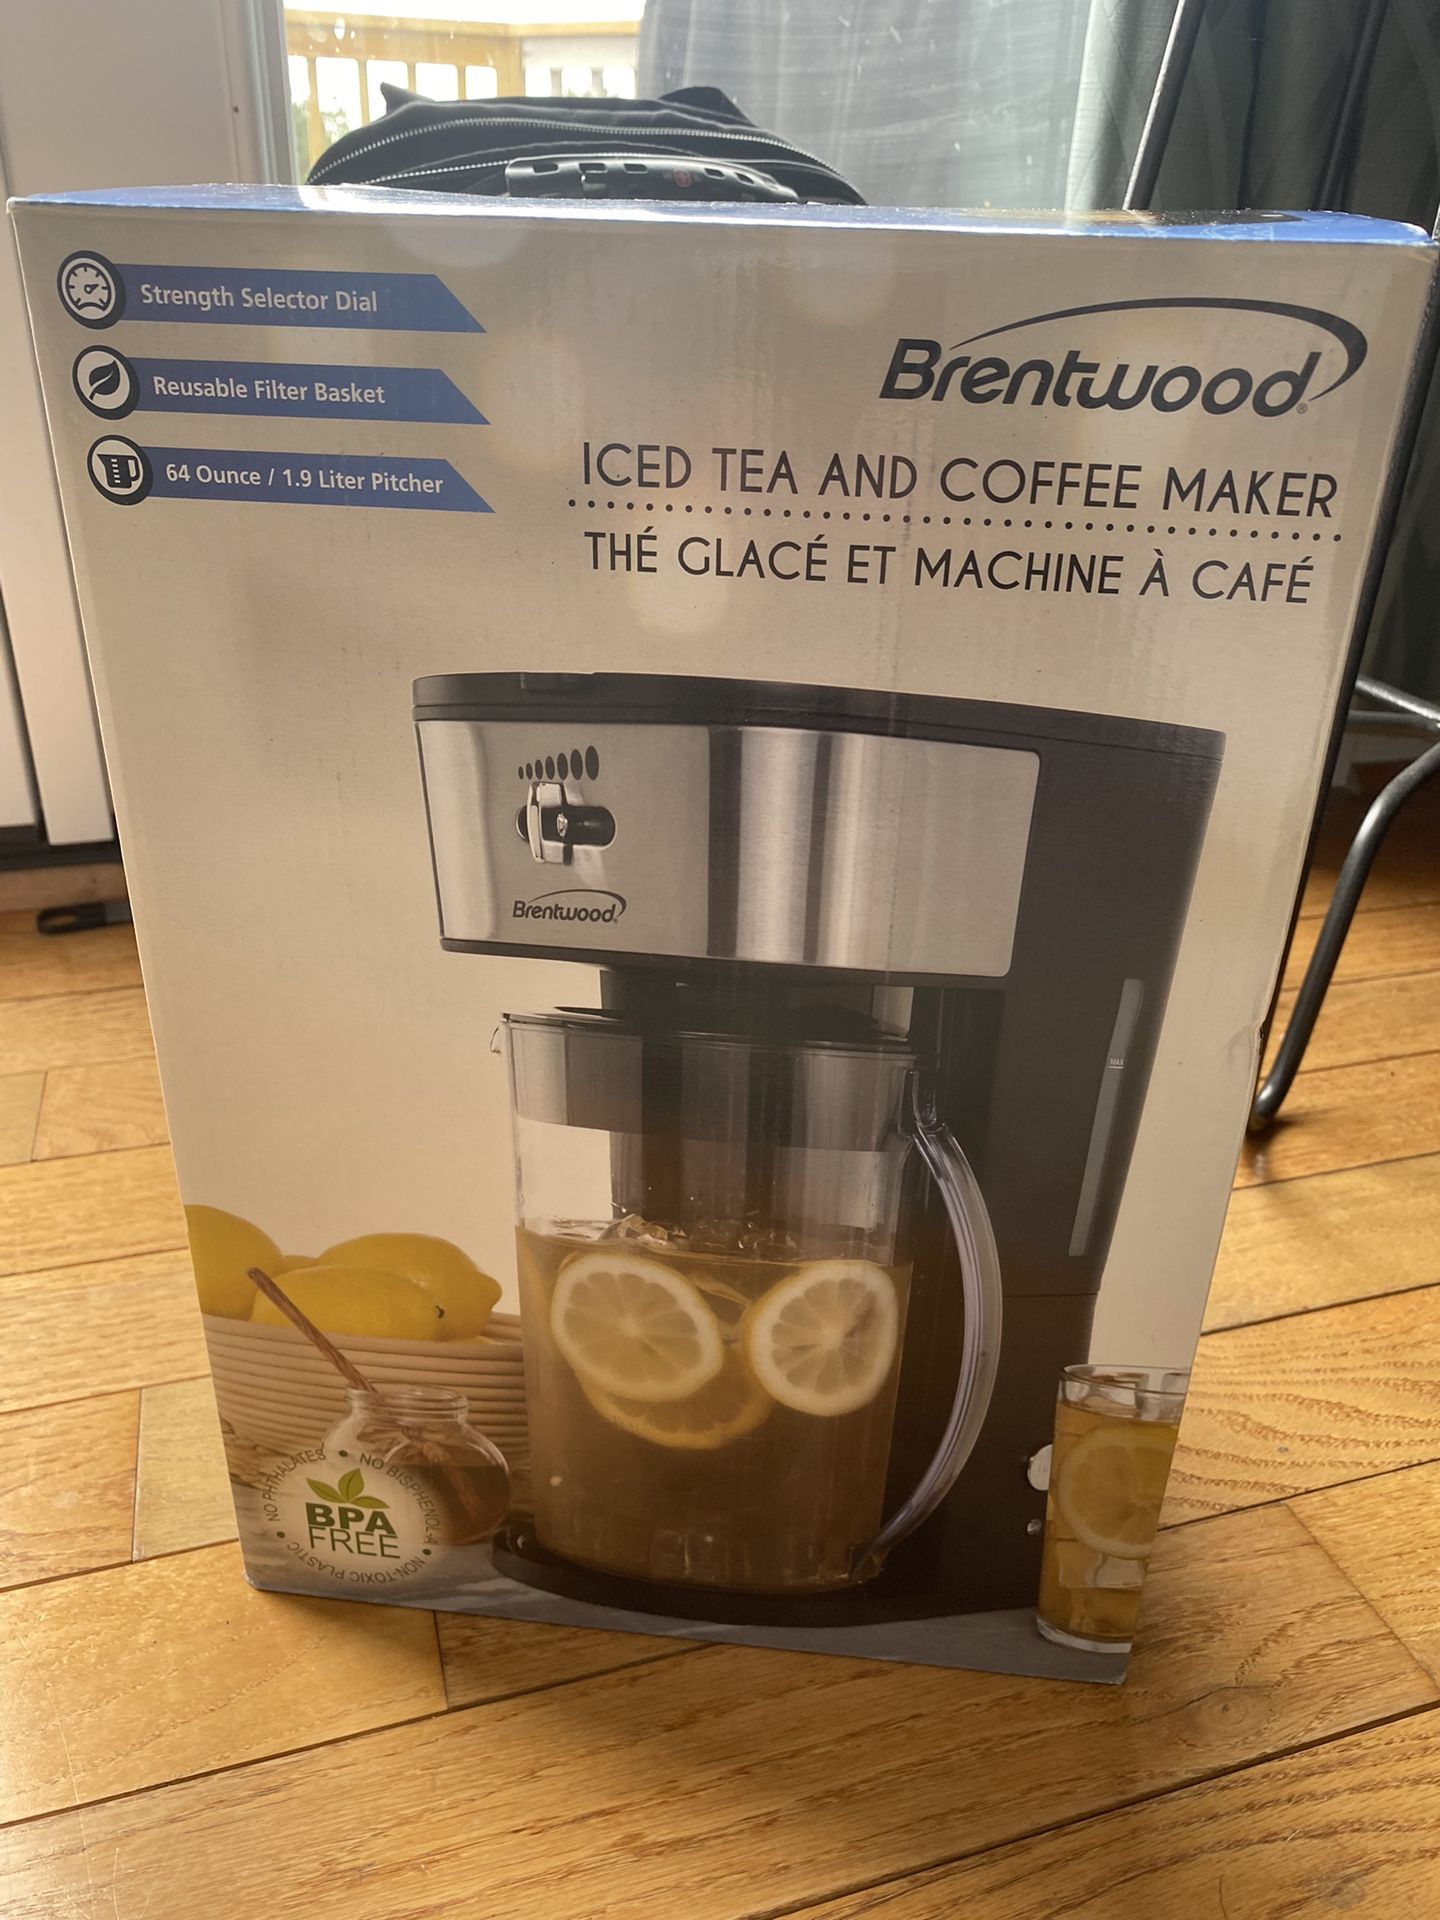 Brentwood Iced Tea And Coffee Maker